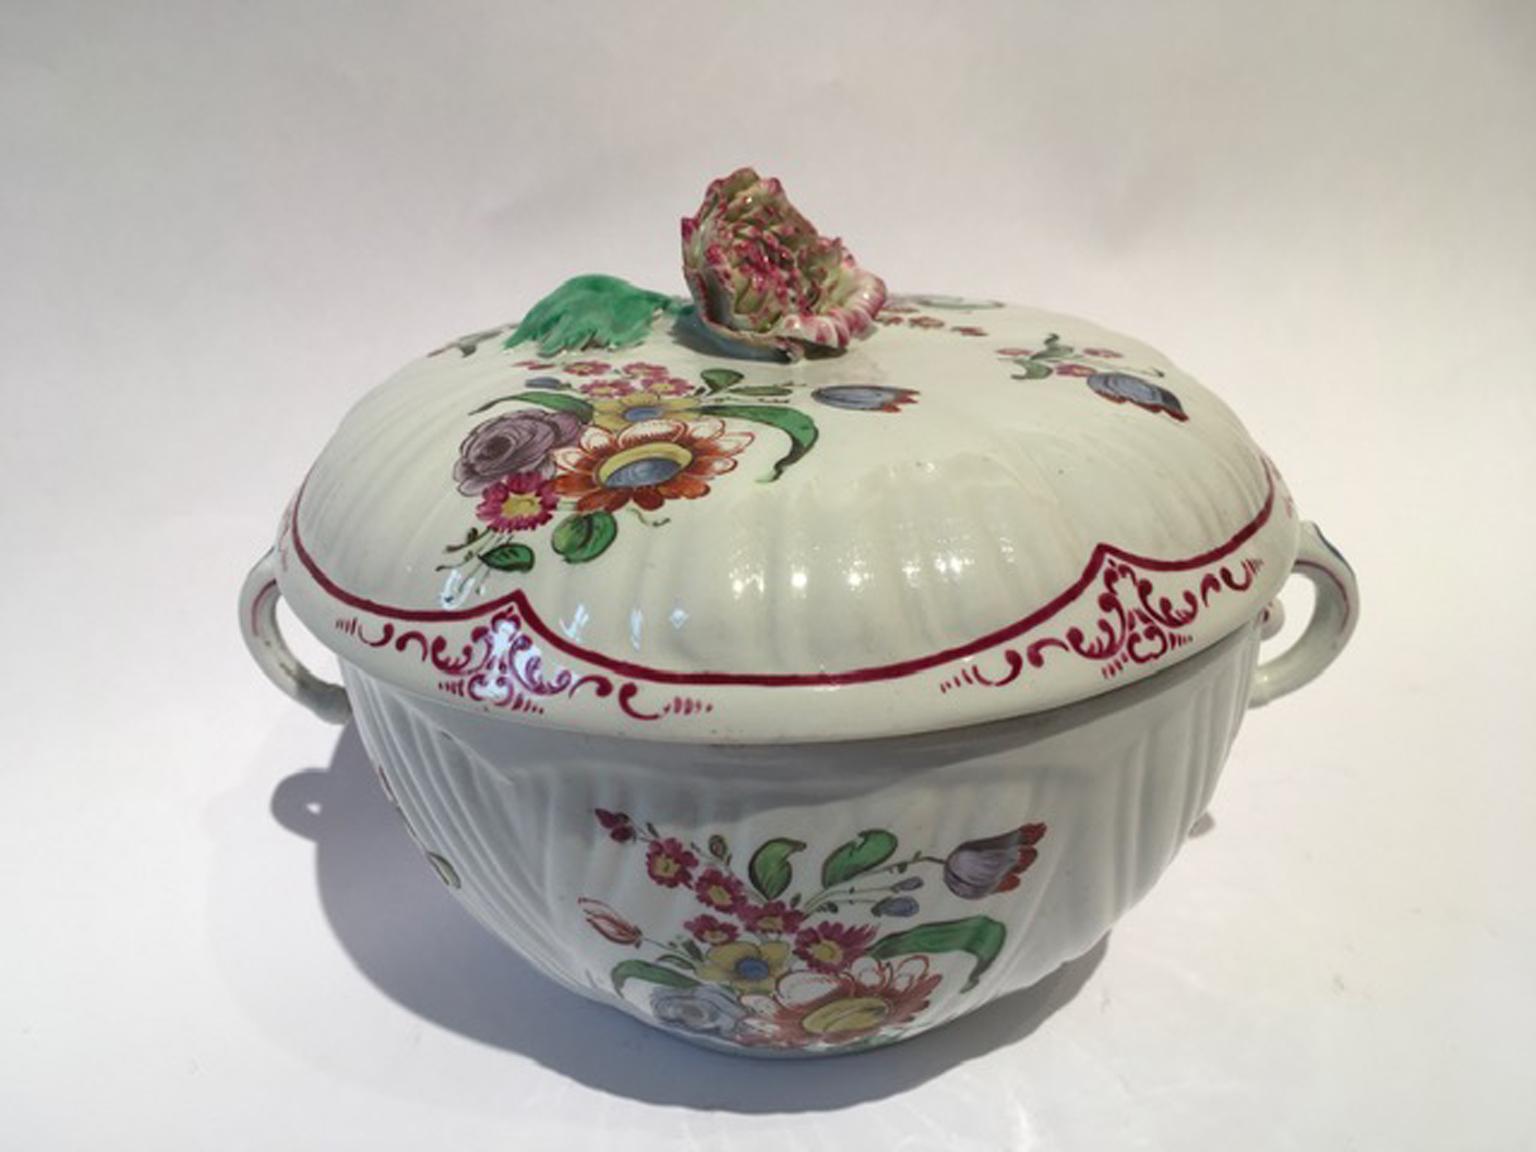 Italy 18th Century Richard Ginori Porcelain Covered Cup with Floral Drawings For Sale 4